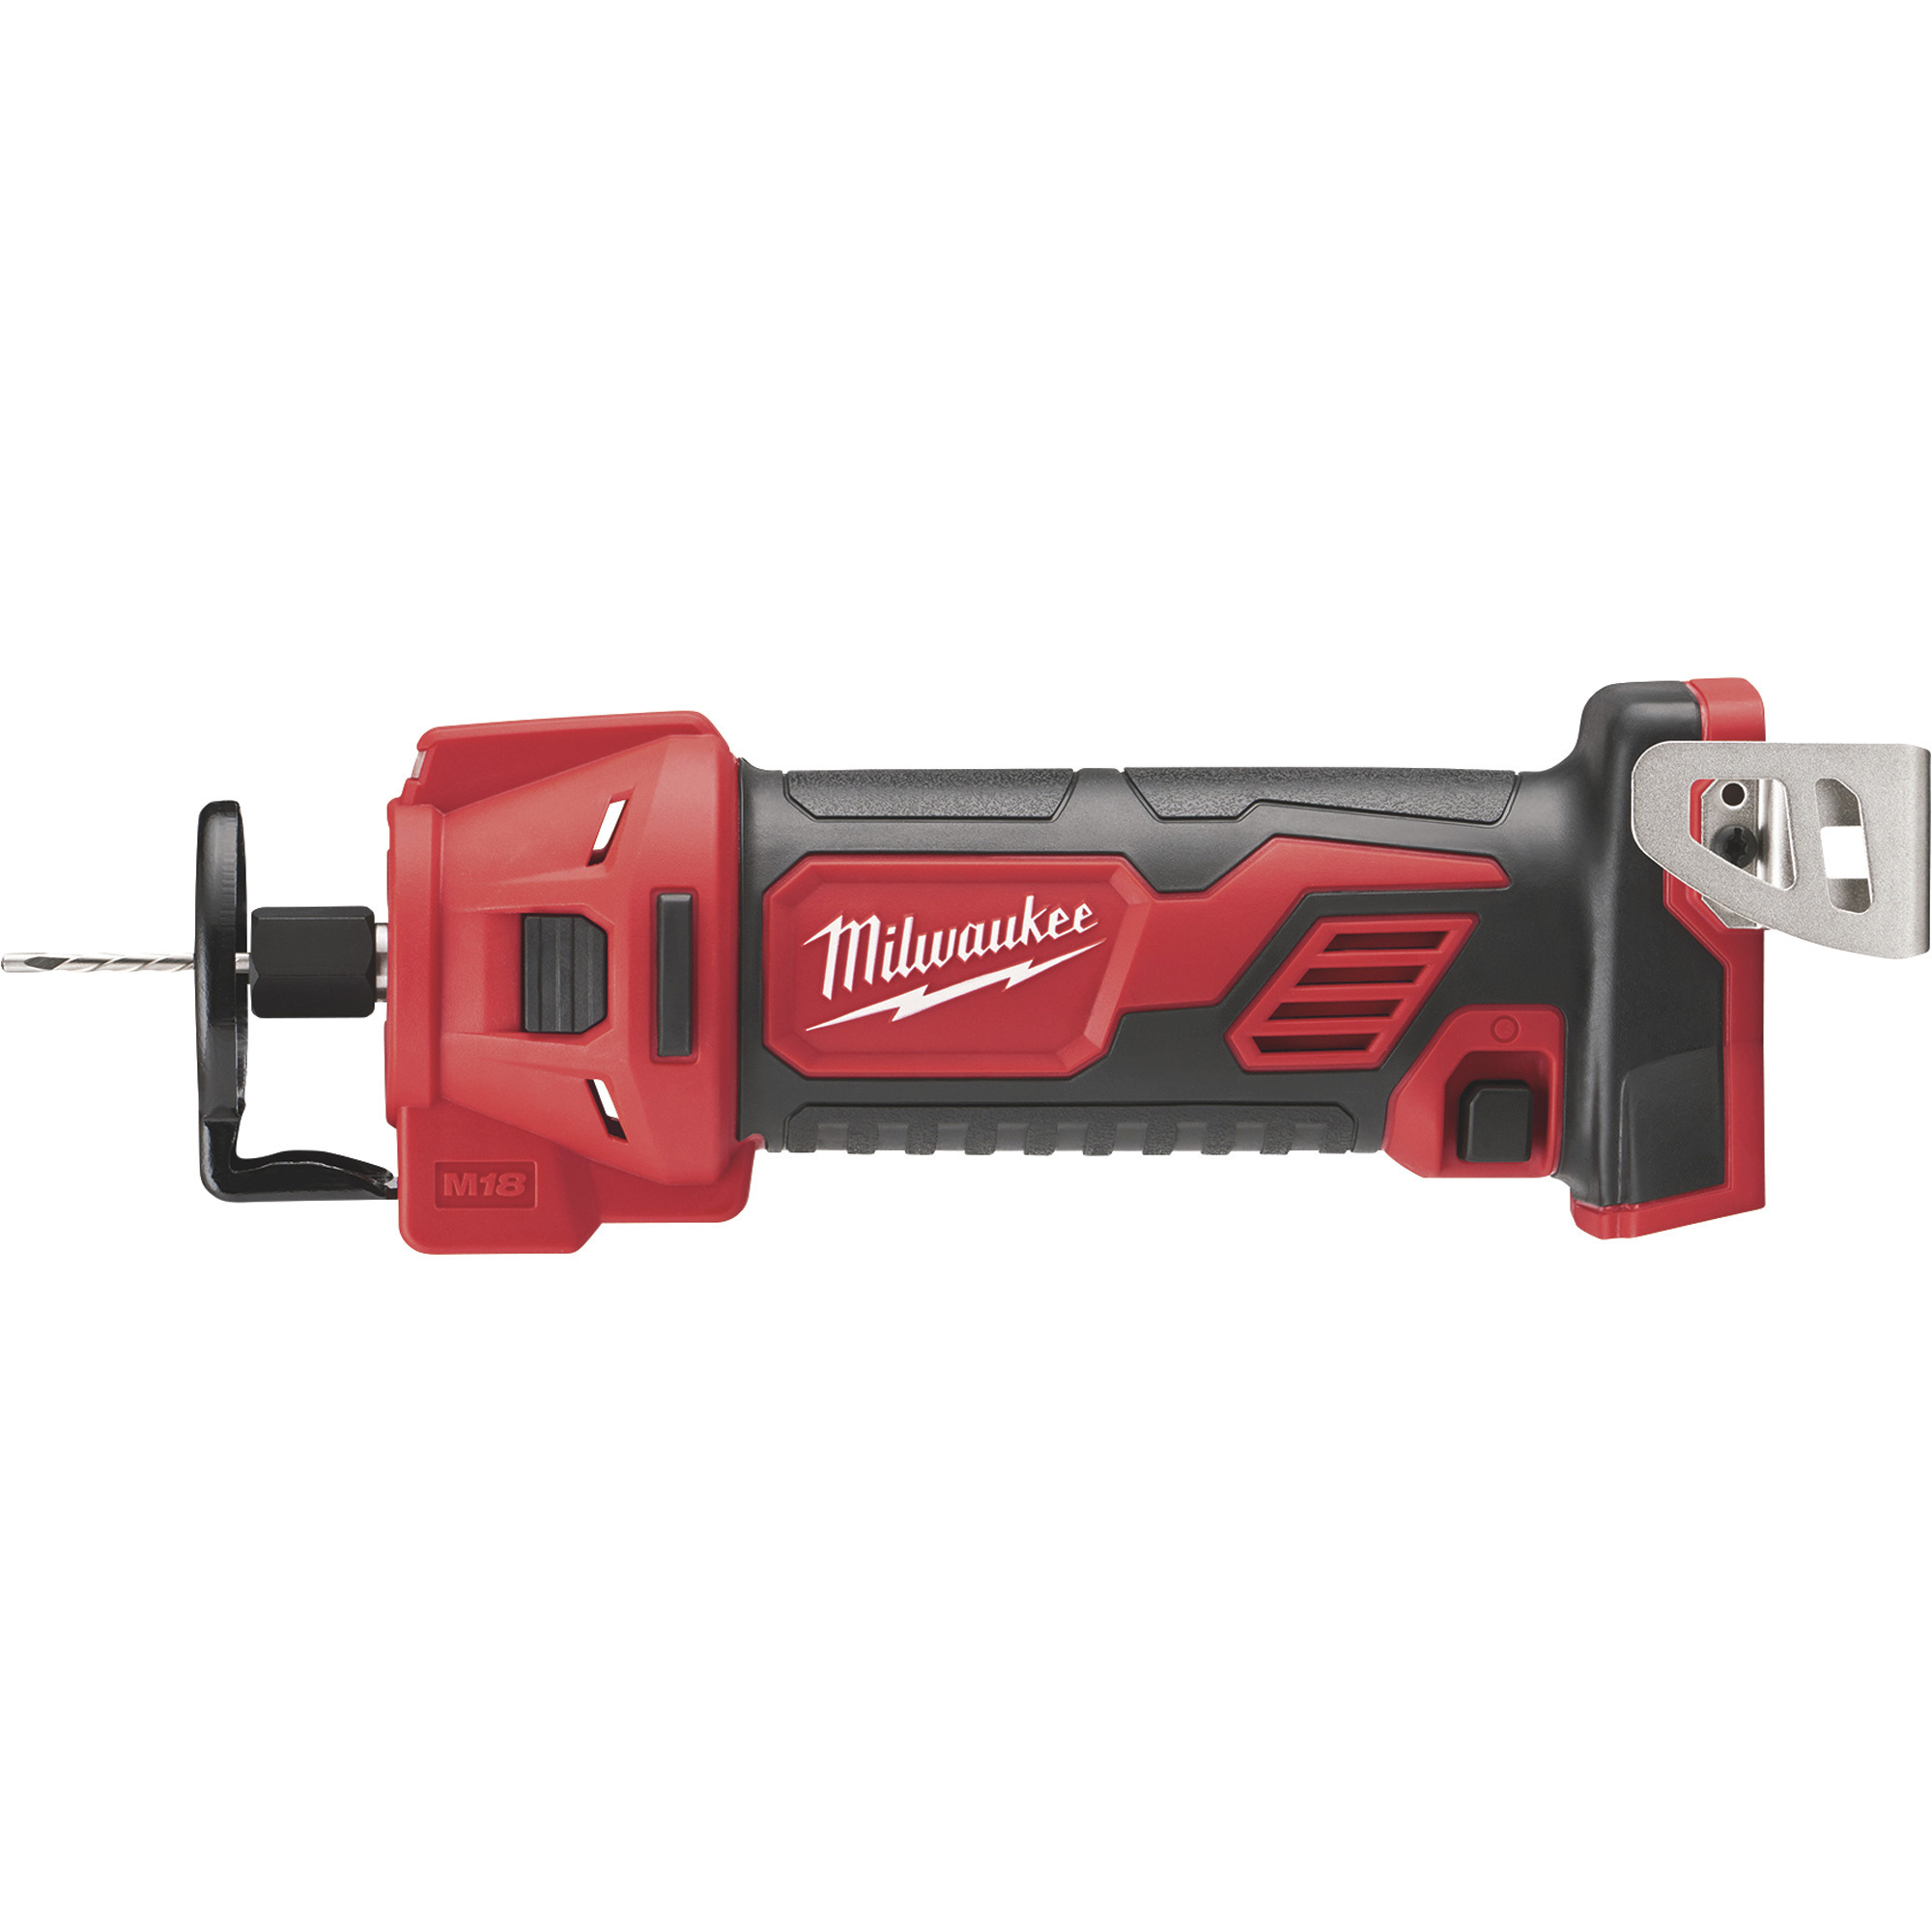 Milwaukee M18 18V Cordless Cut-Out Tool, Tool Only, 28,000 RPM, Model 2627-20